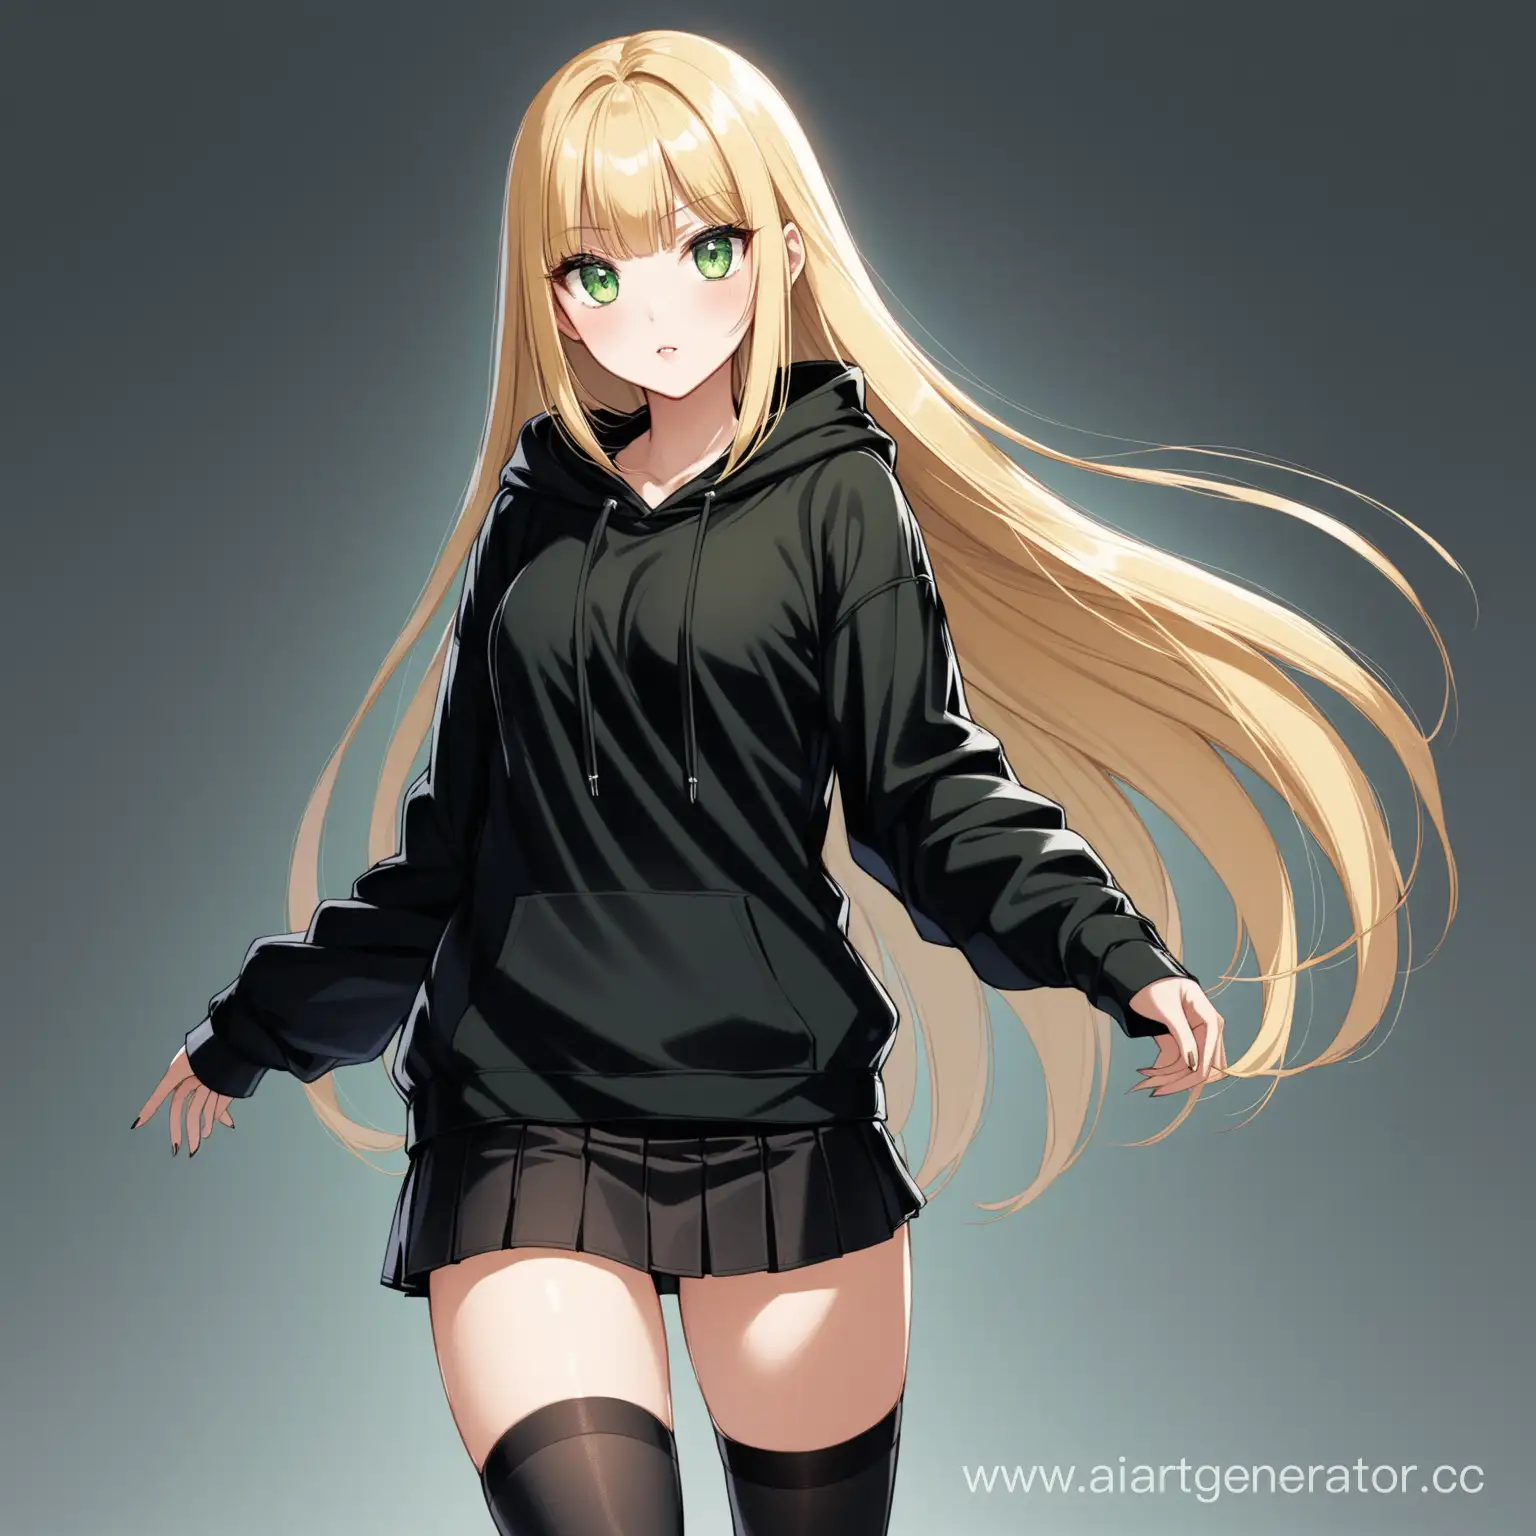 Blonde-Girl-in-Stylish-Black-Outfit-with-Green-Eyes